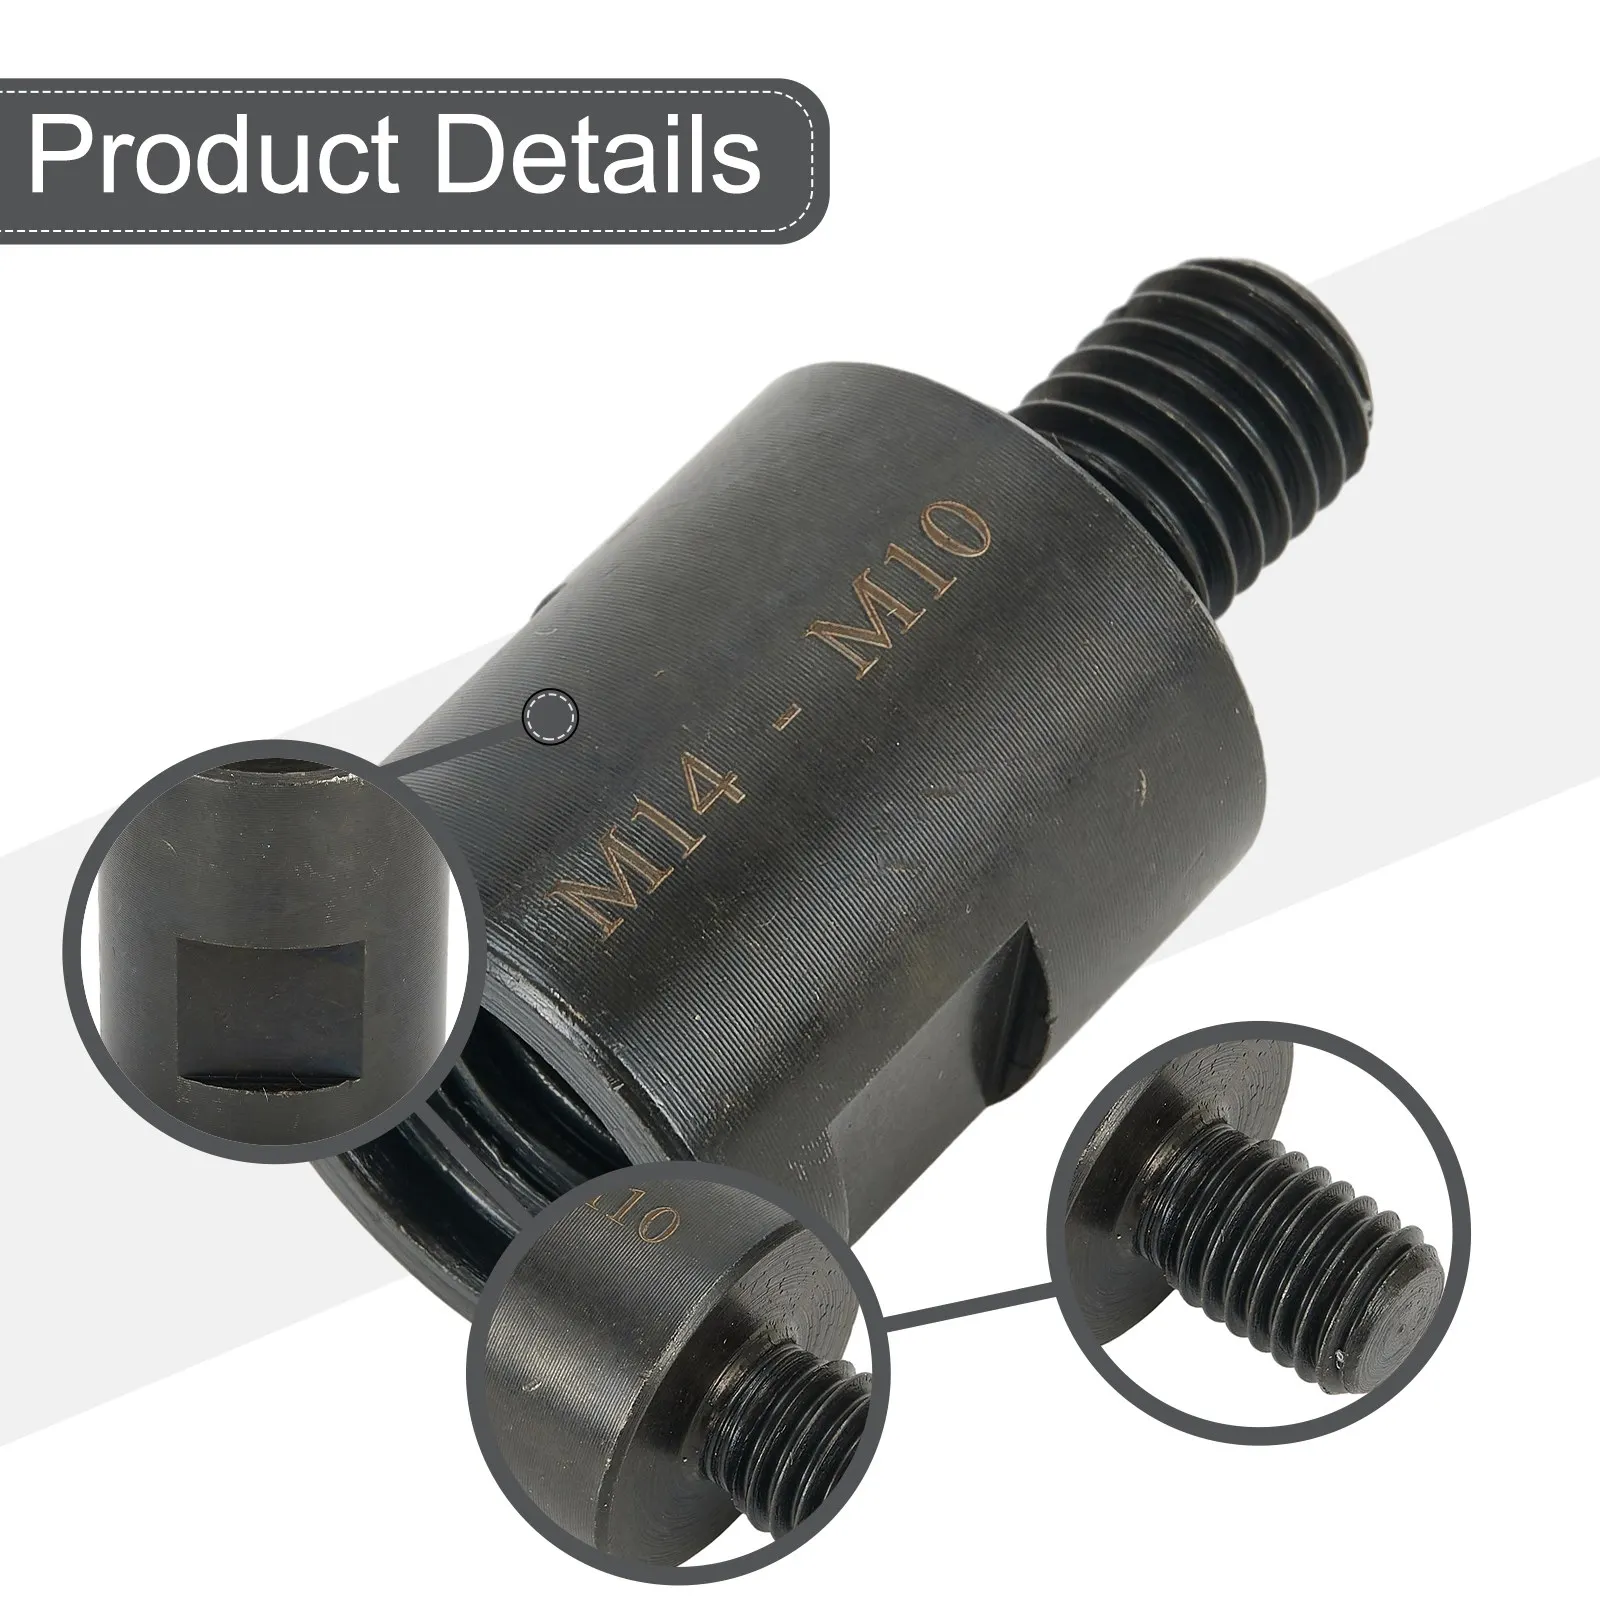 Angle Grinder Adapter Converter M10 M14 5/8-11 Suitable For Polishing Pads Backer Plate, Drill Bits Polishing Machine new mbb18mtl metabo 18v li ion battery converter electric power tool adapter use on makita lxt lithium machine replace bl1830